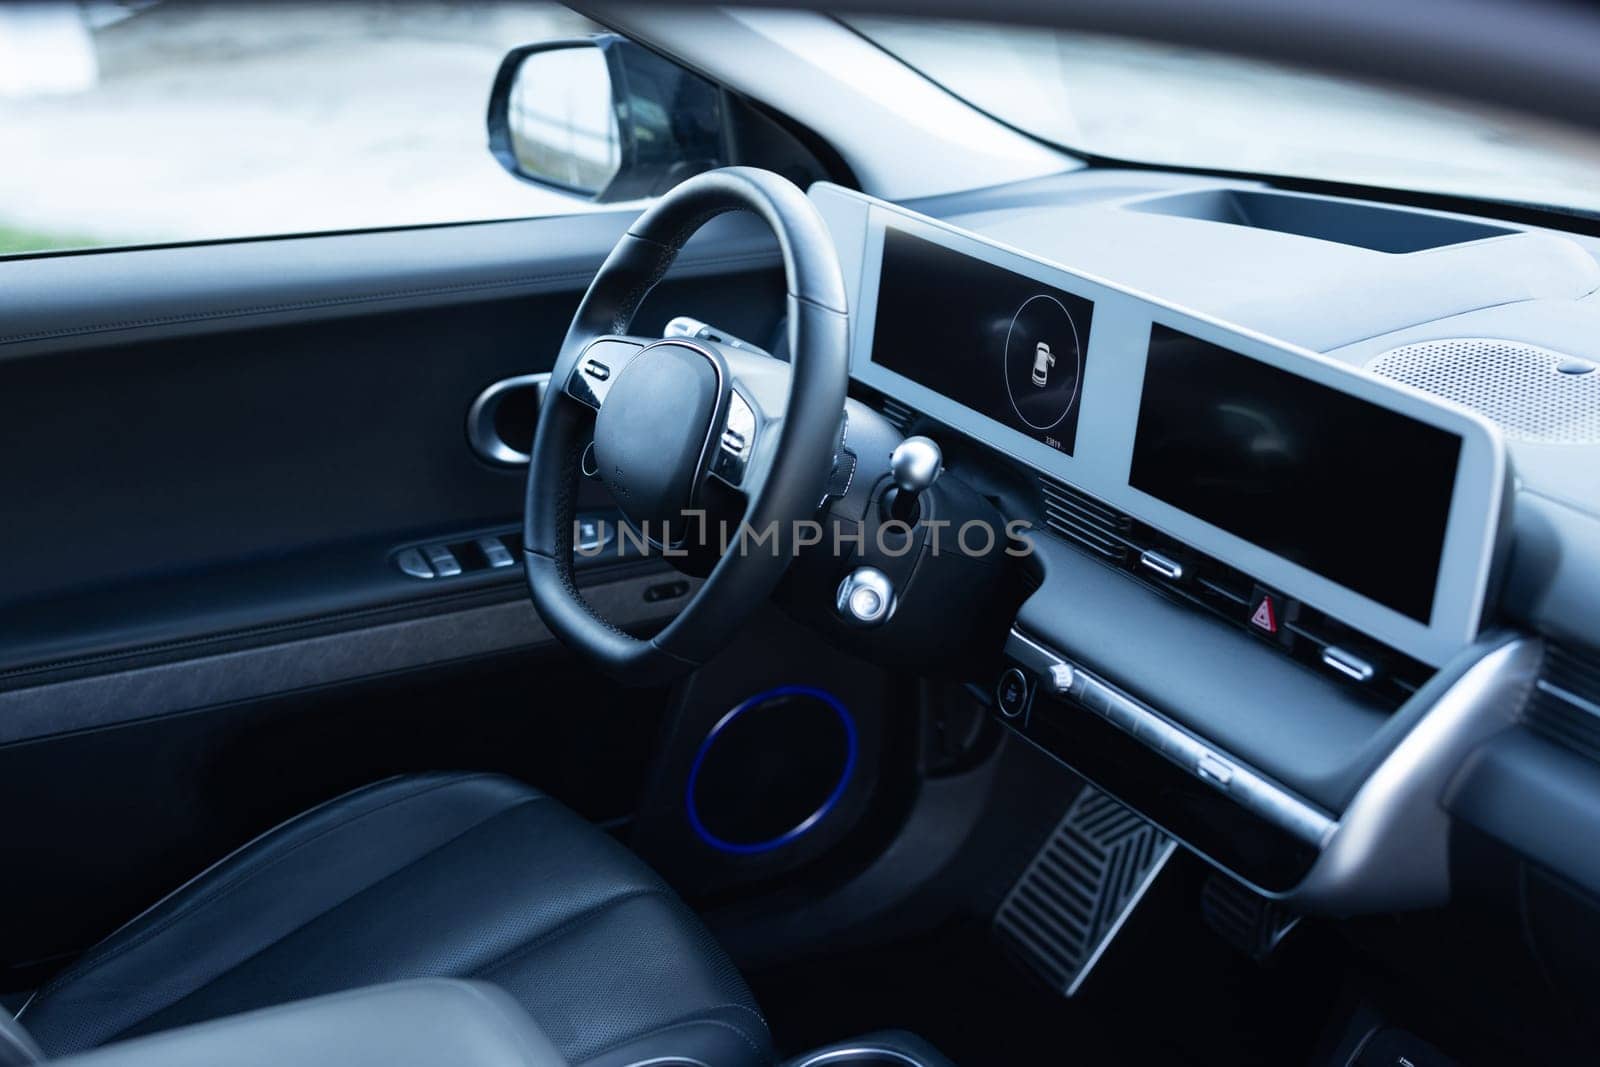 Prestige electric car. Inside car interior with front leather seats, steering wheel, windows, console, gear shift, electric buttons, digital speedometer. Luxury car interior. Car detailing series by uflypro